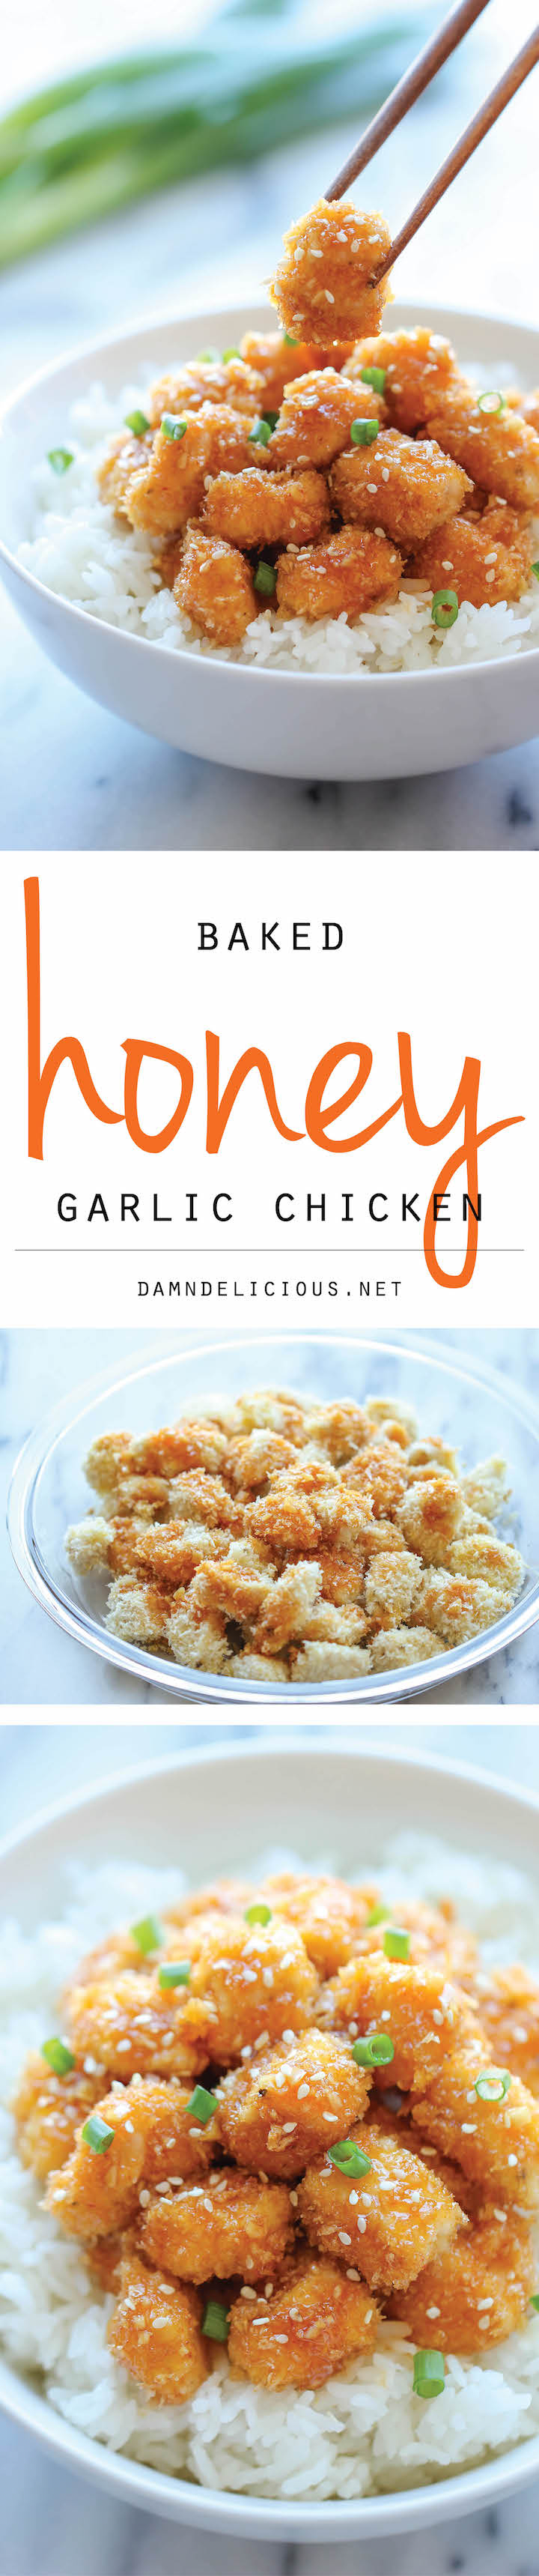 Baked Honey Garlic Chicken - A take-out favorite that you can make right at home, baked to crisp perfection. It's healthier, cheaper and so much tastier!